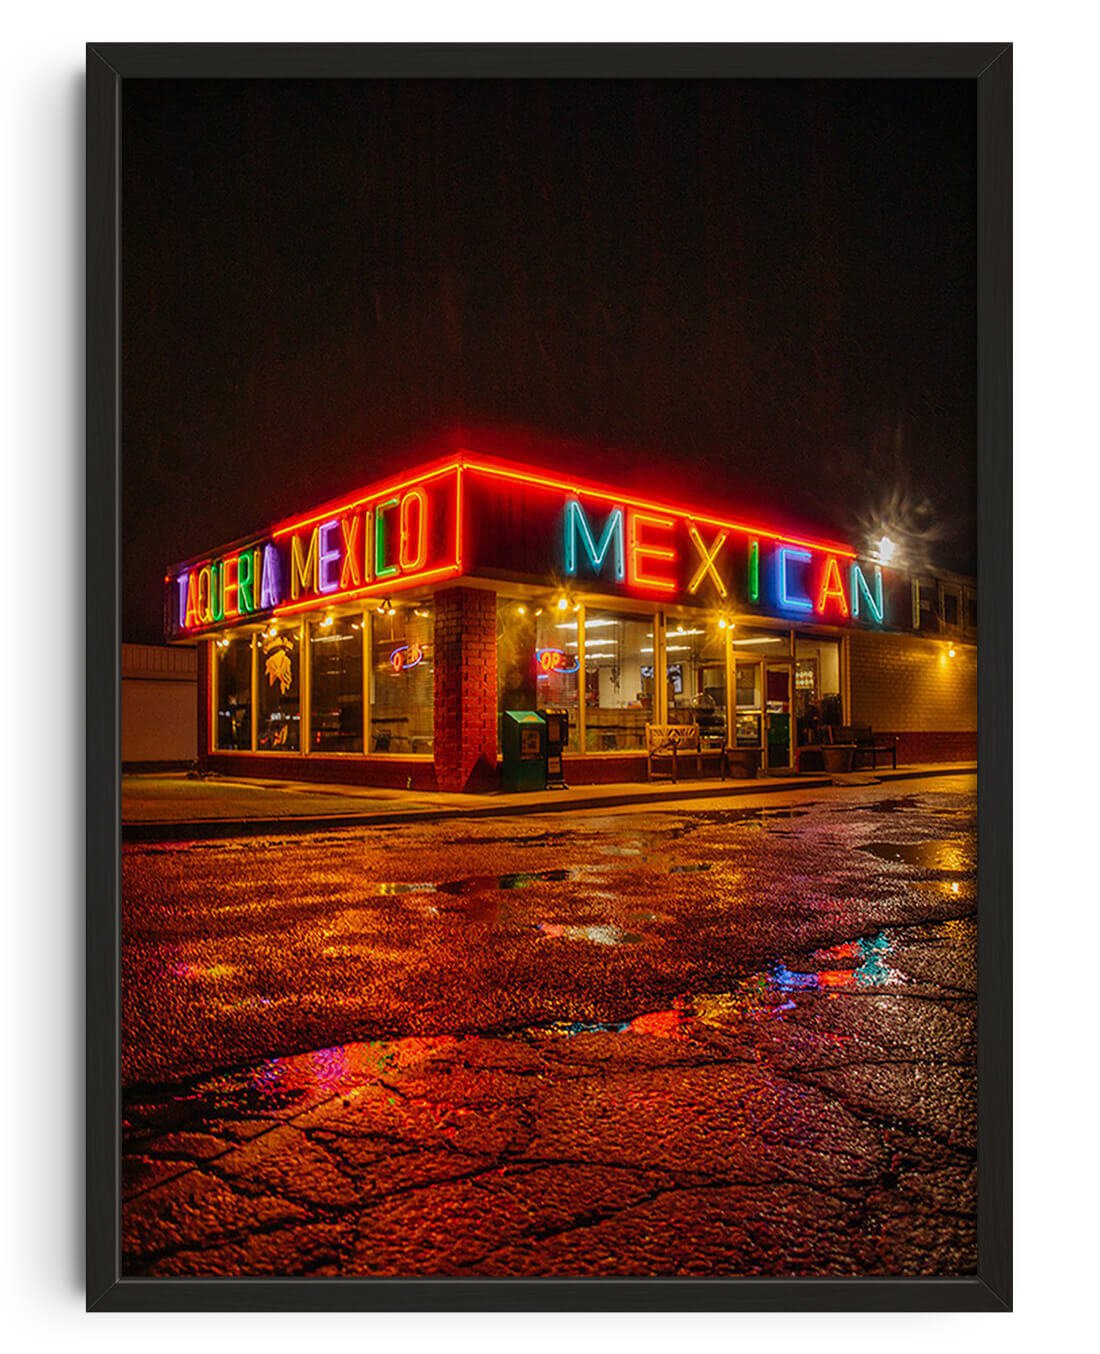 Taqueria Mexico by Kenzie Meeker contemporary wall art print from DROOL